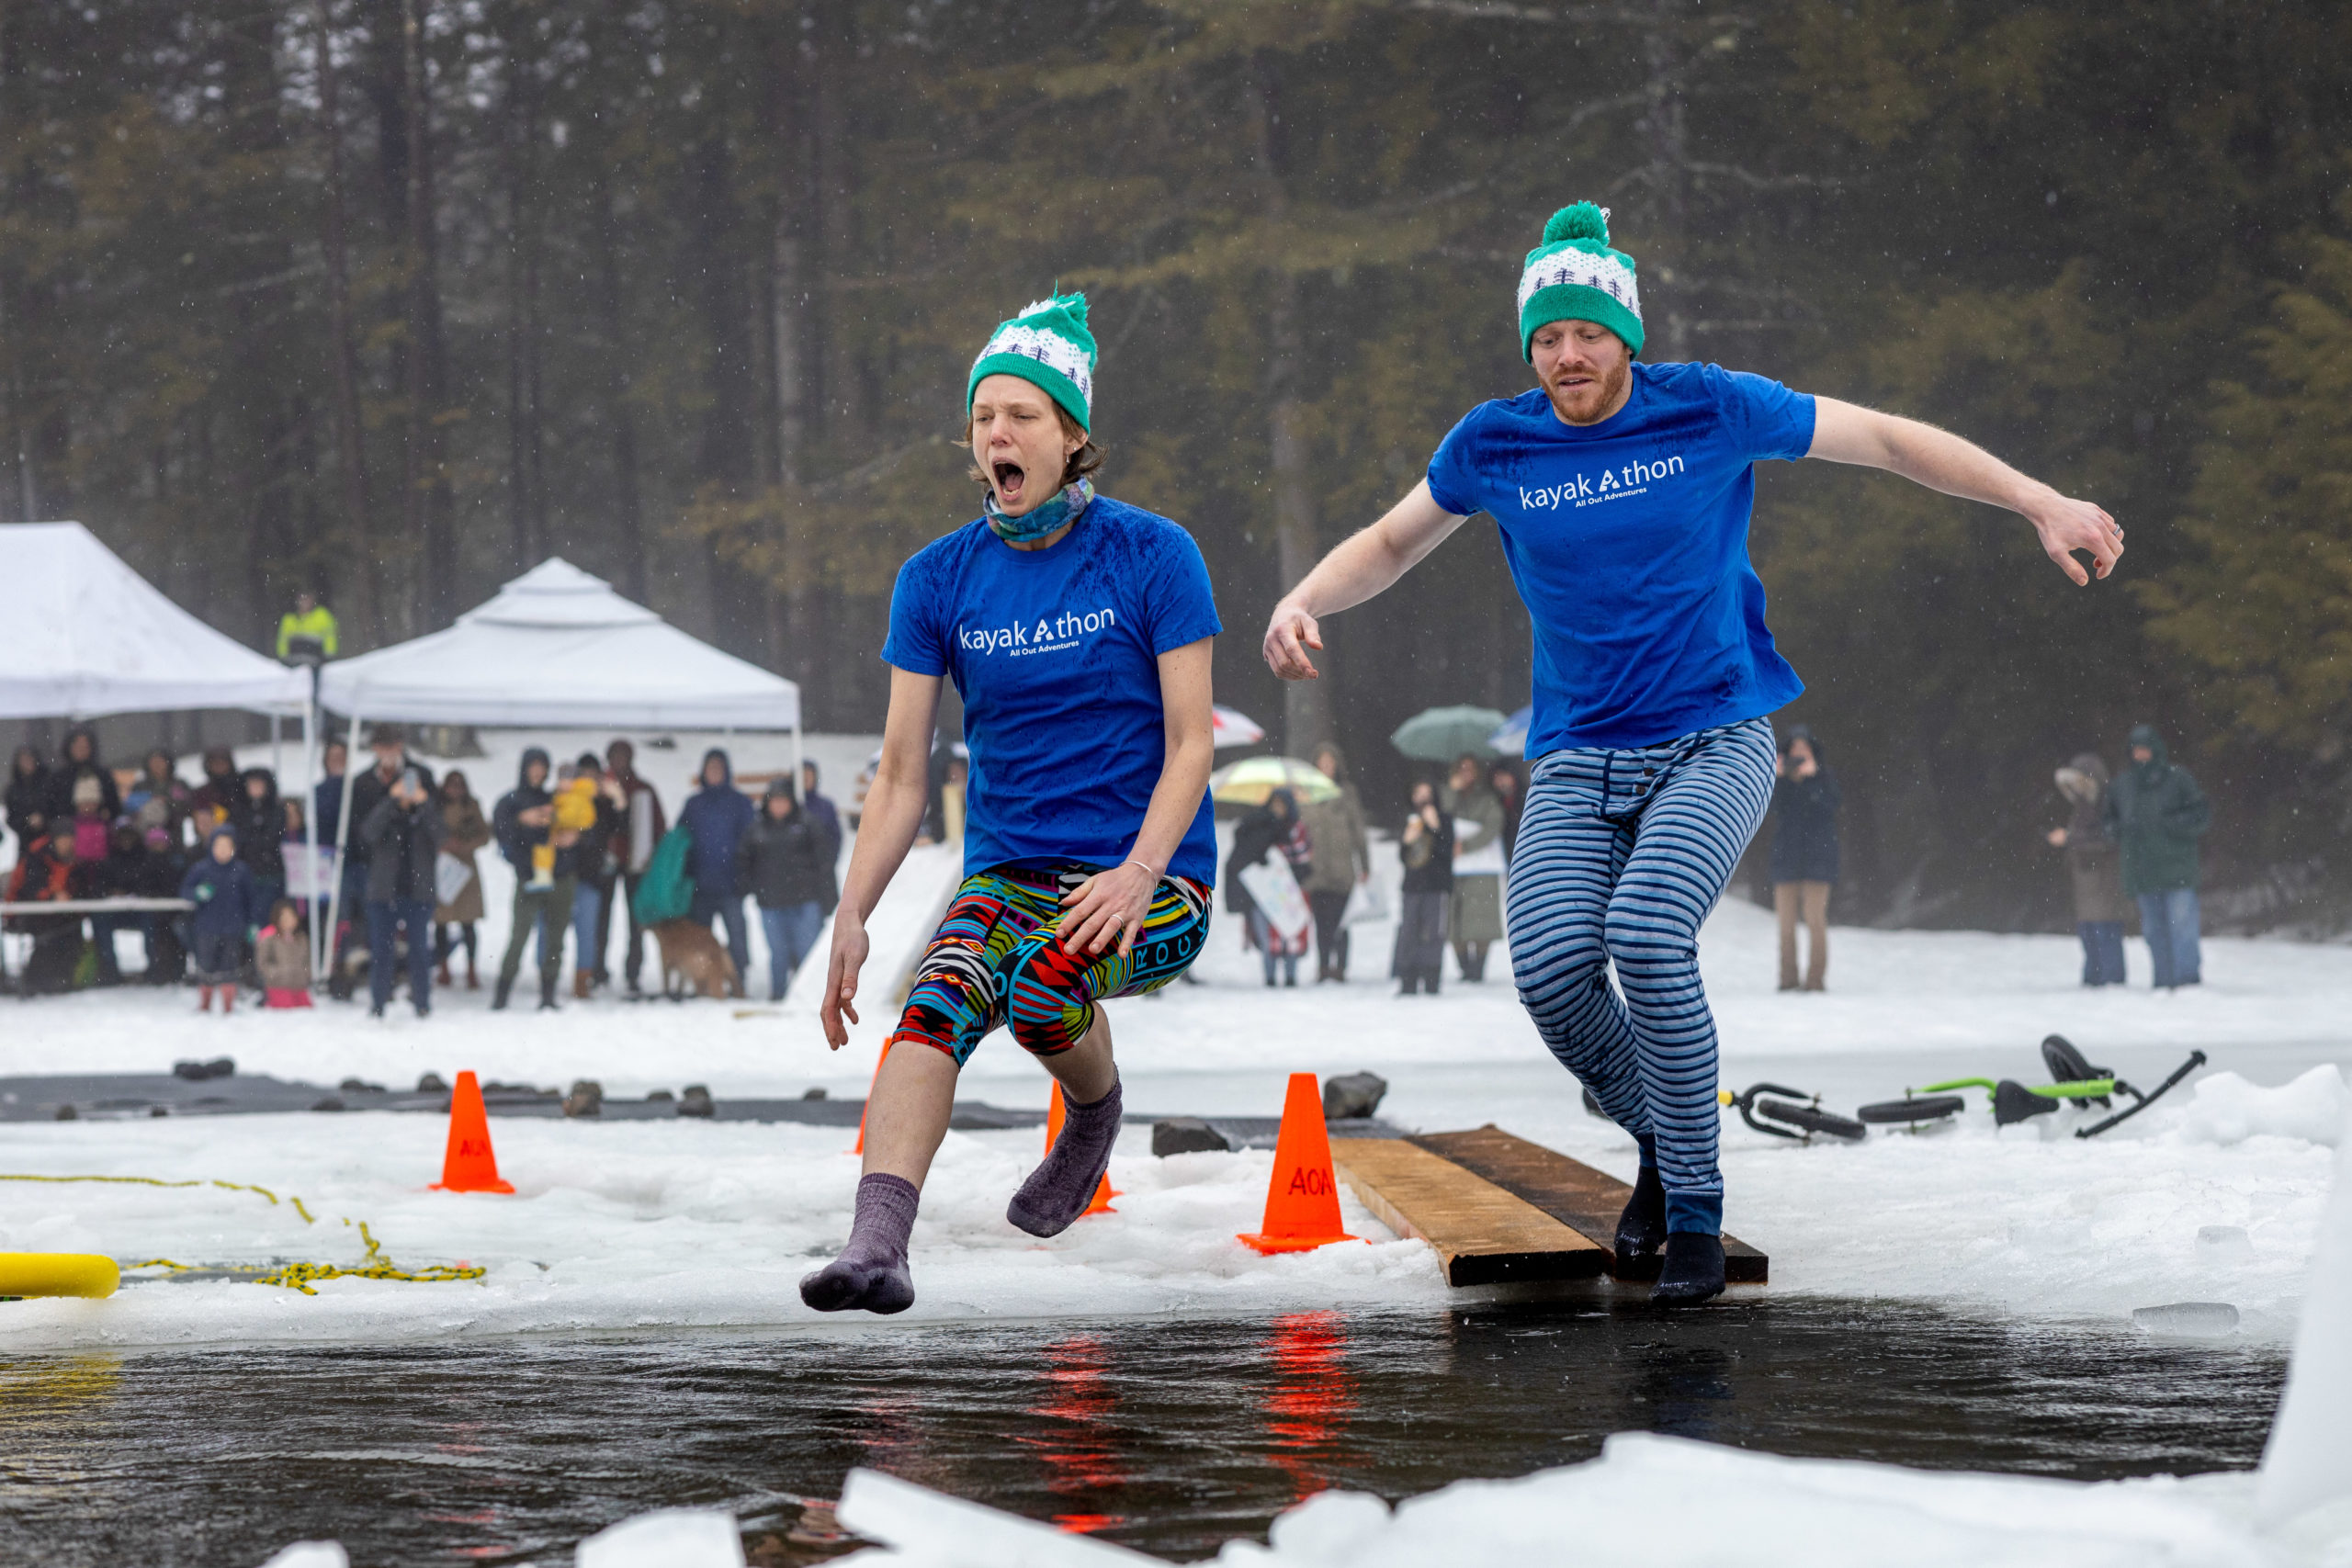 2 people wearing blue "Kayak-a-thon" t-shirts and green and white hats jump into the plunge hole